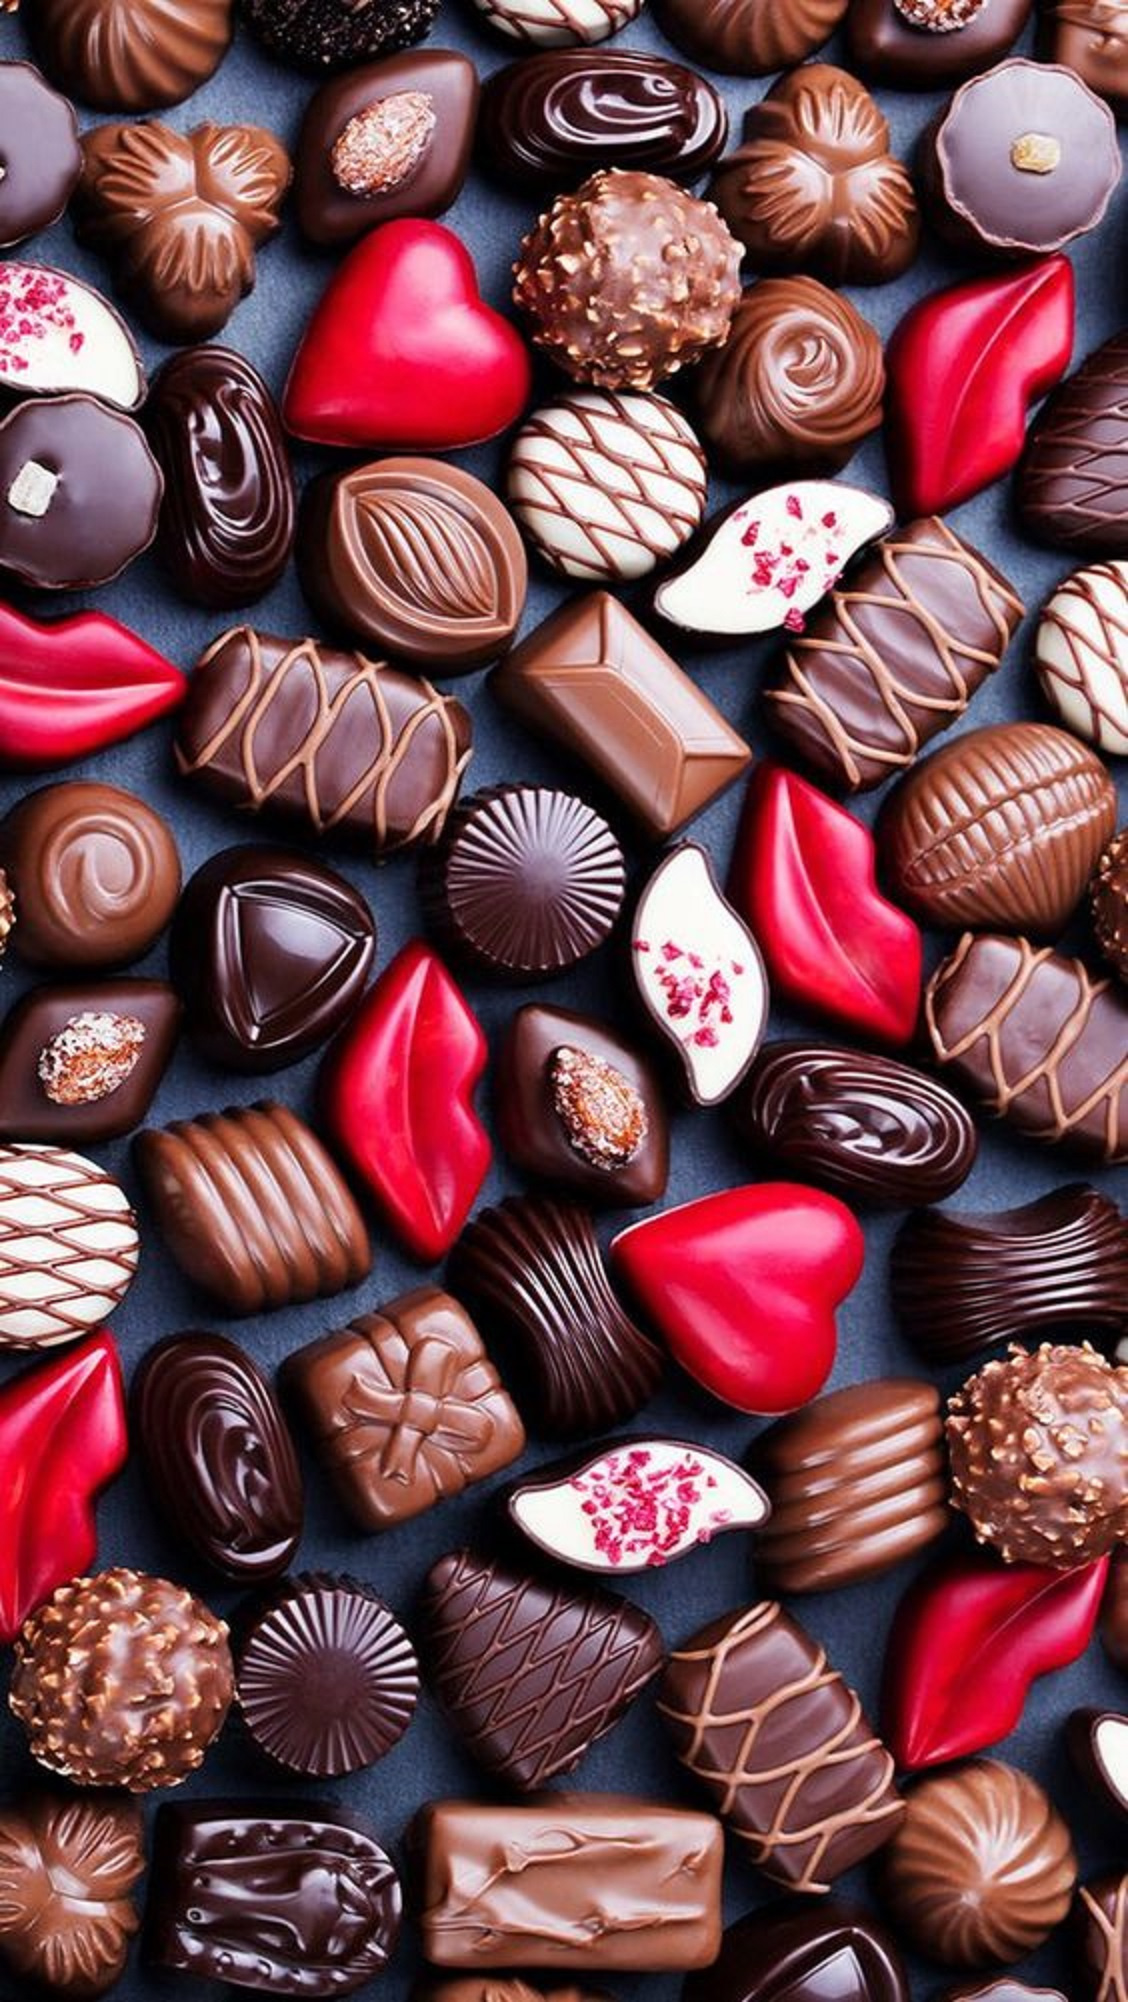 Chocolate candy wallpaper Mobile Walls